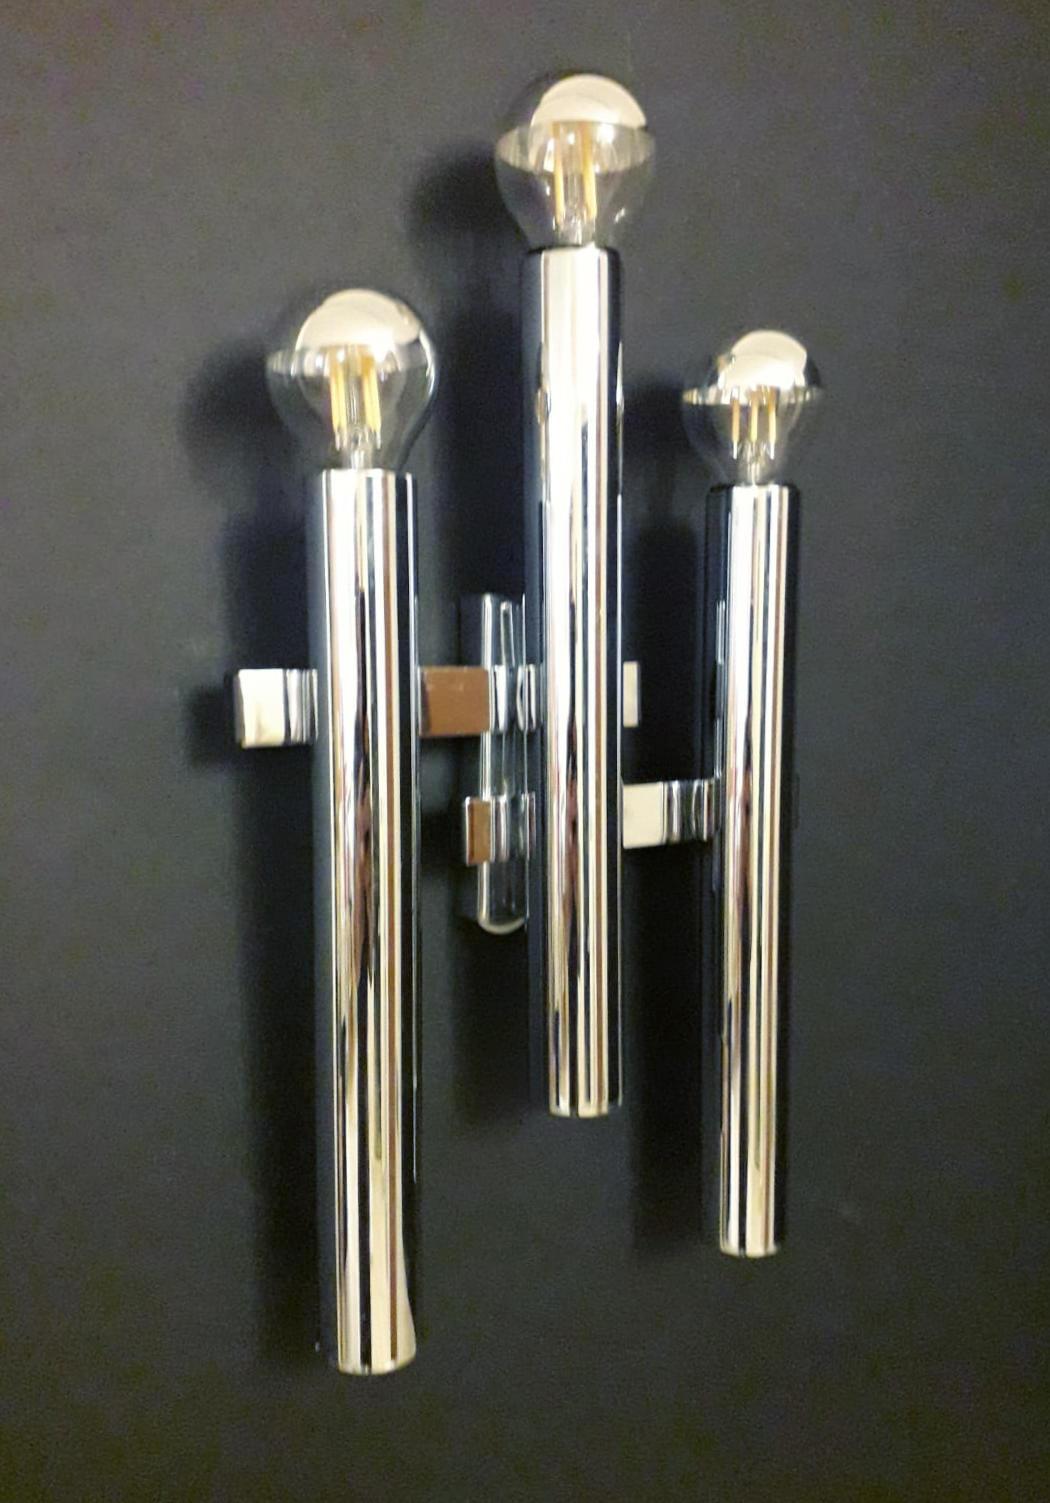 Space Age Geometric Sconces by Gaetano Sciolari - 9 Available For Sale